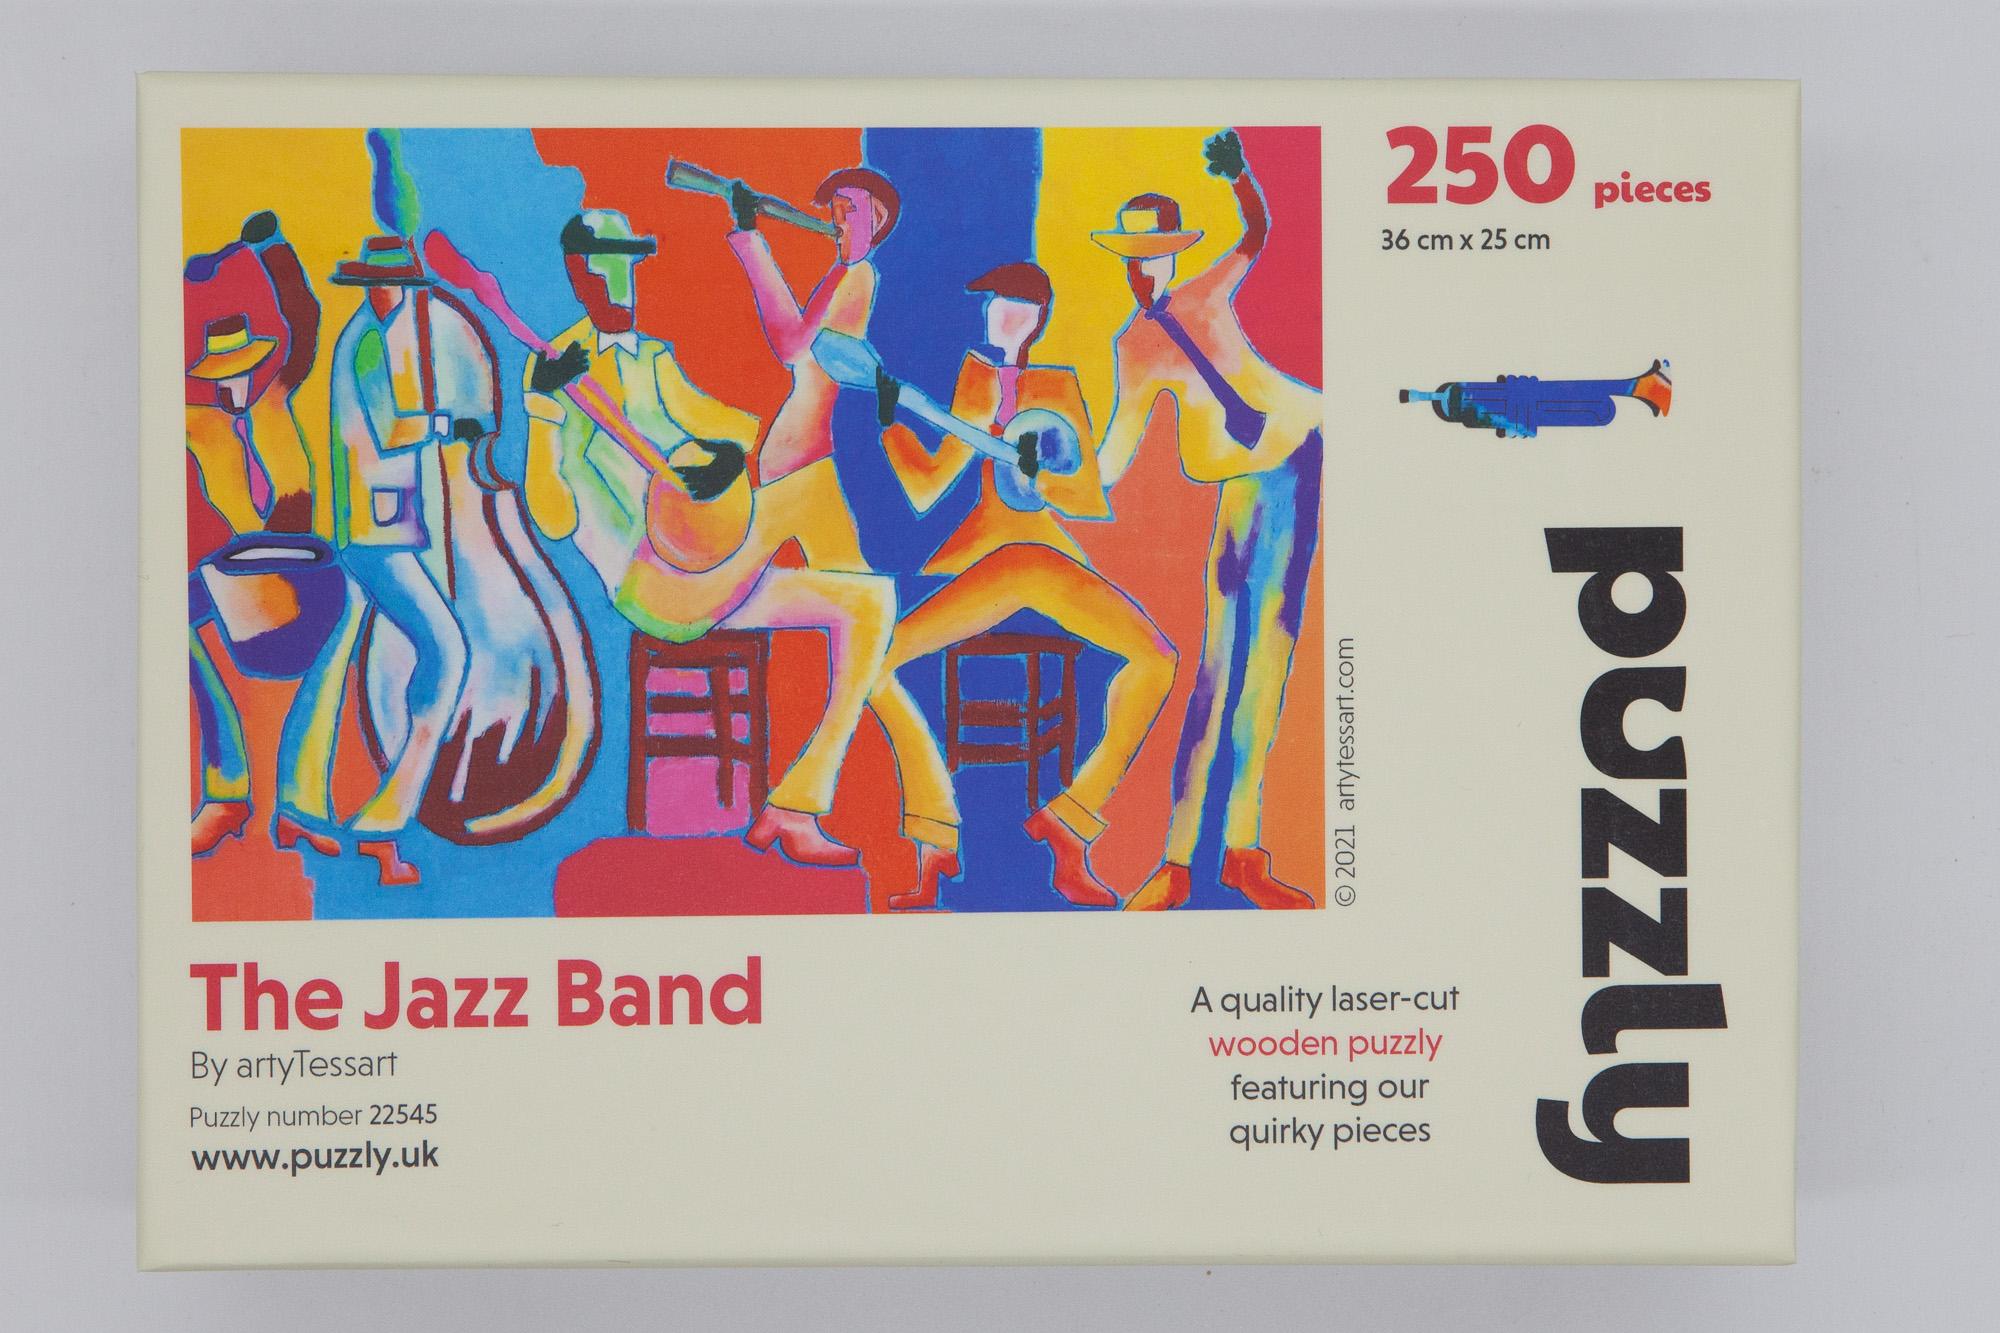 The Jazz Band Wooden Puzzle